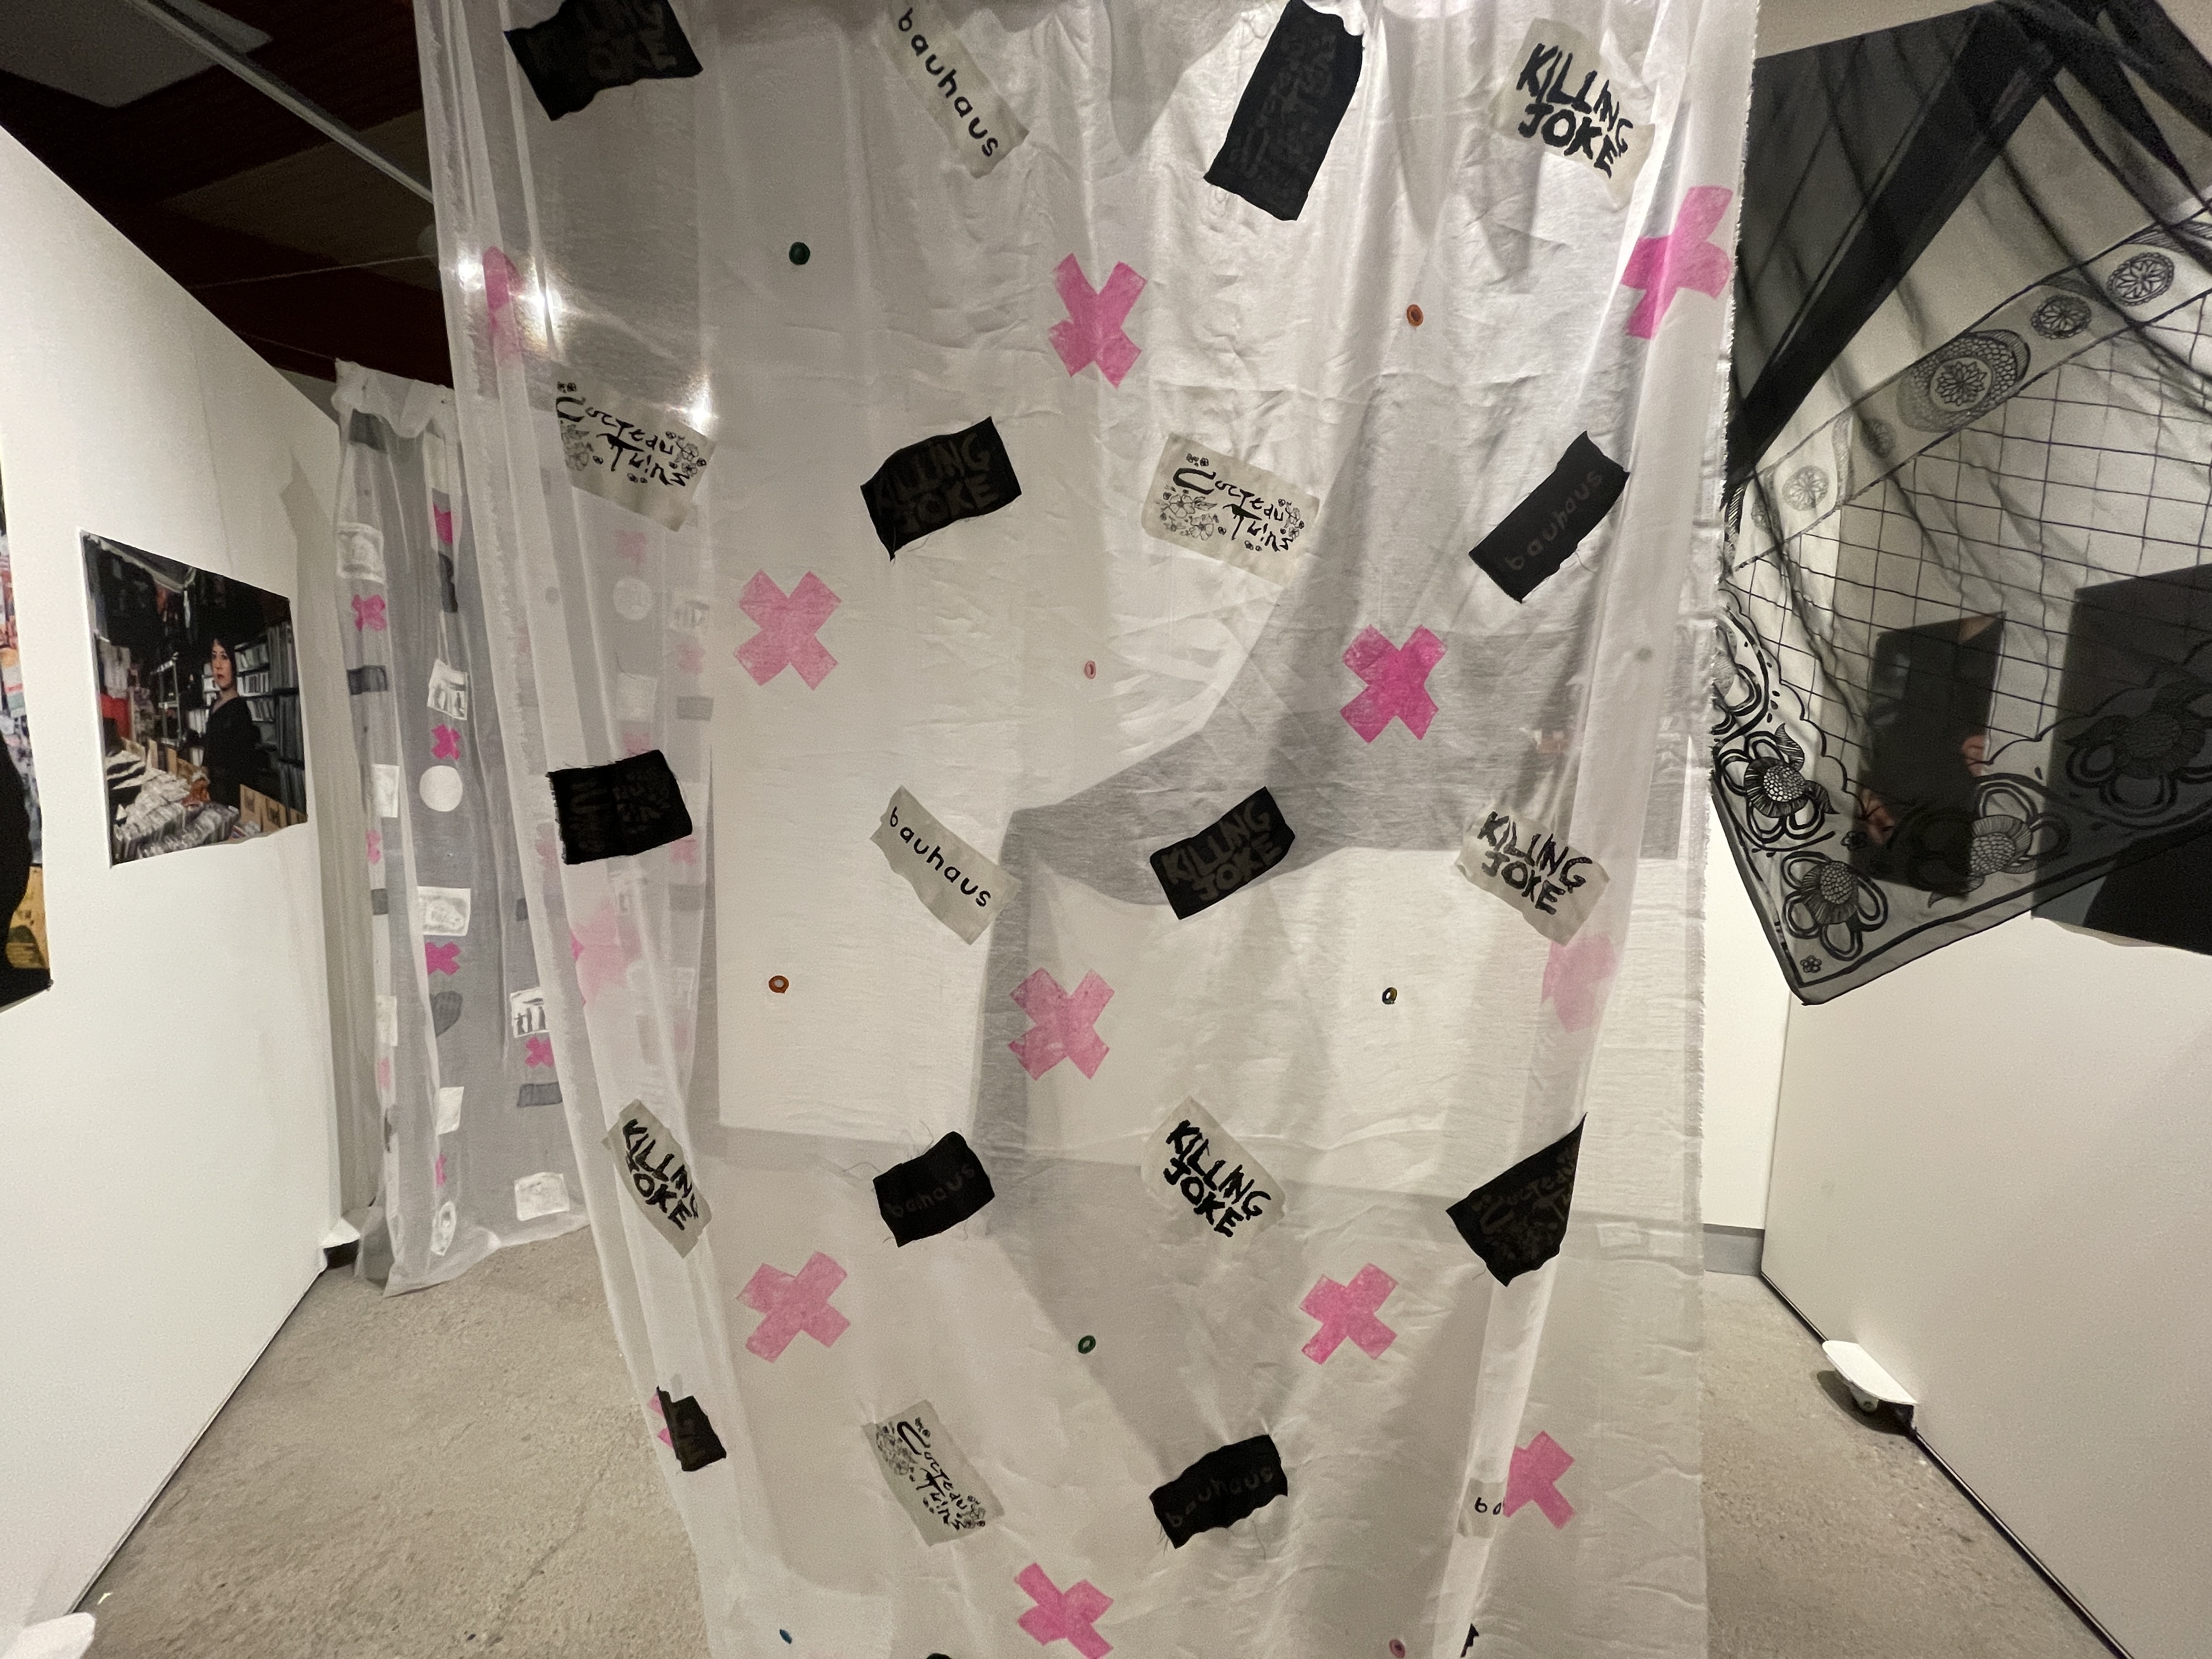 Image of Meher's thesis work, An interior view of an art installation featuring transparent curtains with various black and pink graphic elements, including text that reads 'Bauhaus' and 'KILLING JOKE'. The curtains are hung in a space with white walls, and are slightly overlapping, creating a partitioned area. On the left, a photograph is mounted on the wall, and the reflective surface on the right hints at the rest of the gallery space.